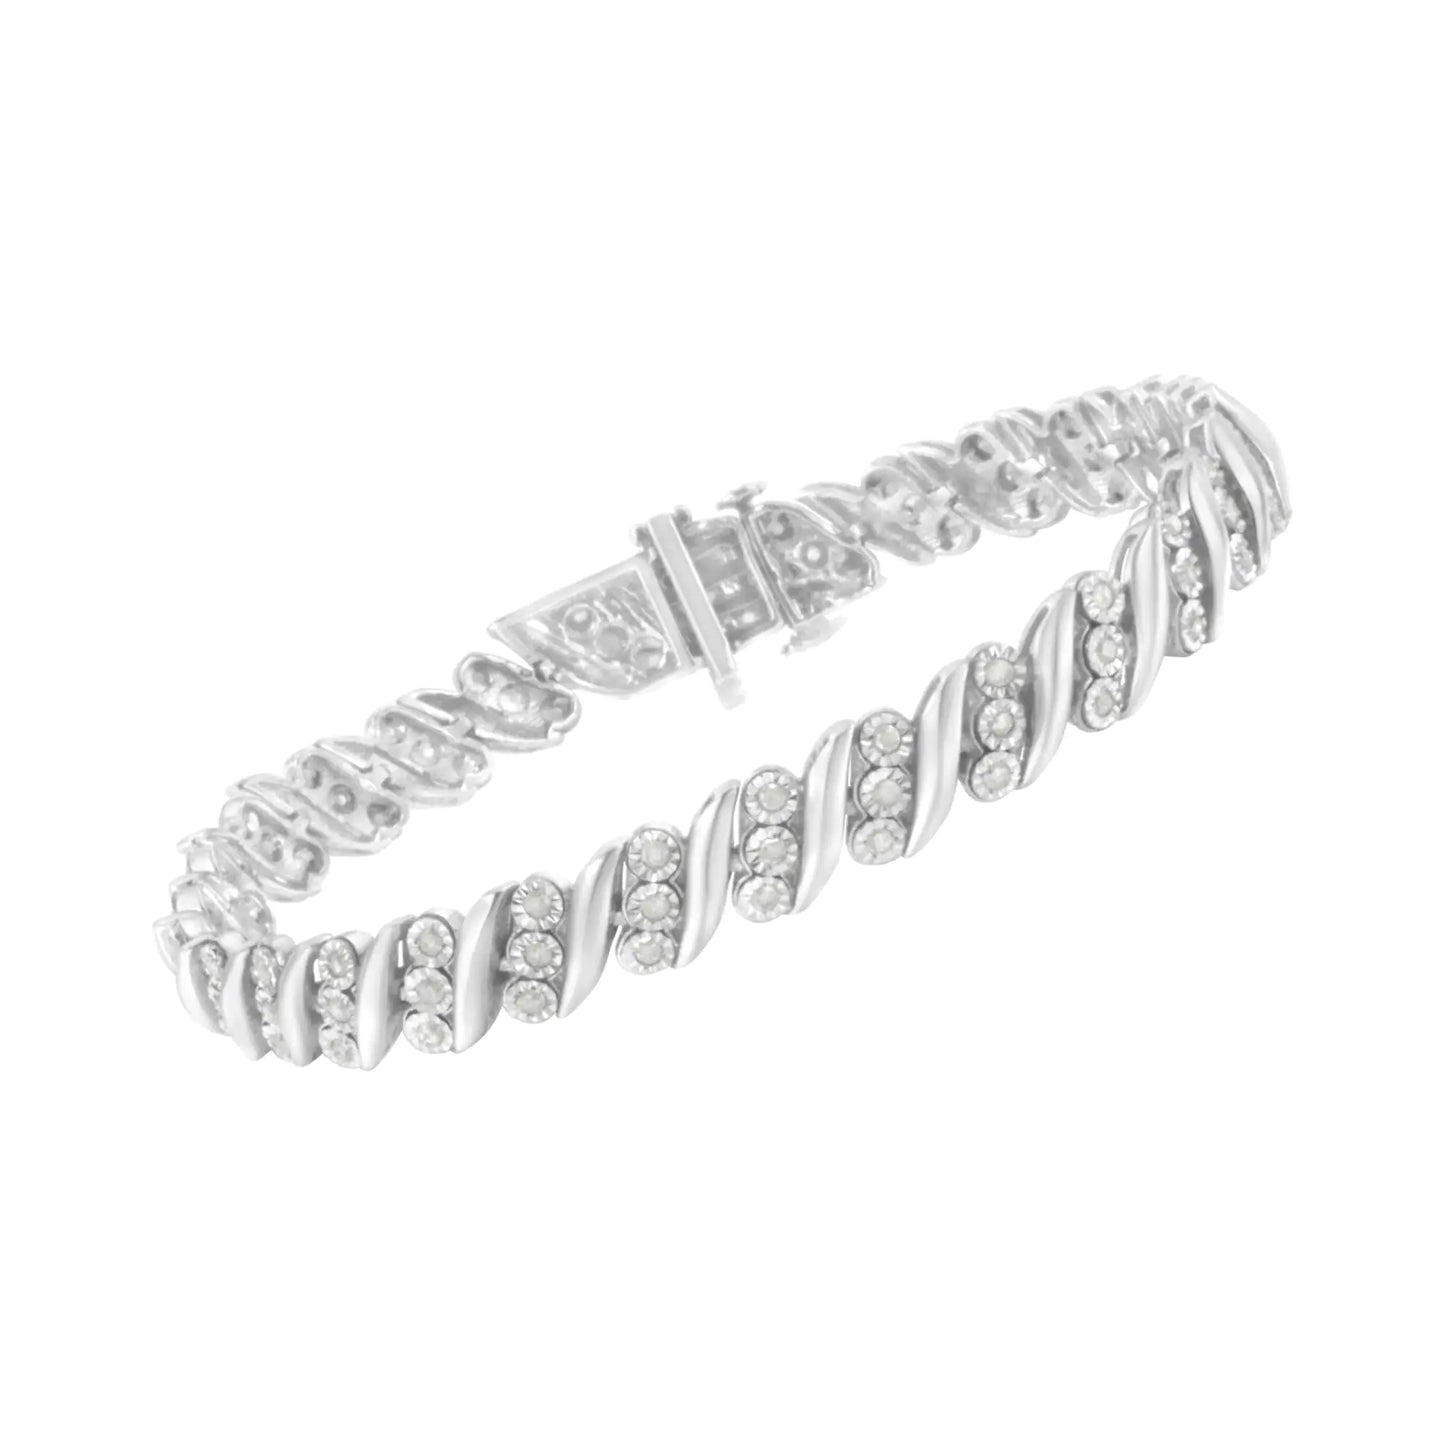 .925 Sterling Silver 3-Stone Row Diamond "S" Link Bracelet (1 cttw, I-J Color, I3 Clarity) - Size 7.5"